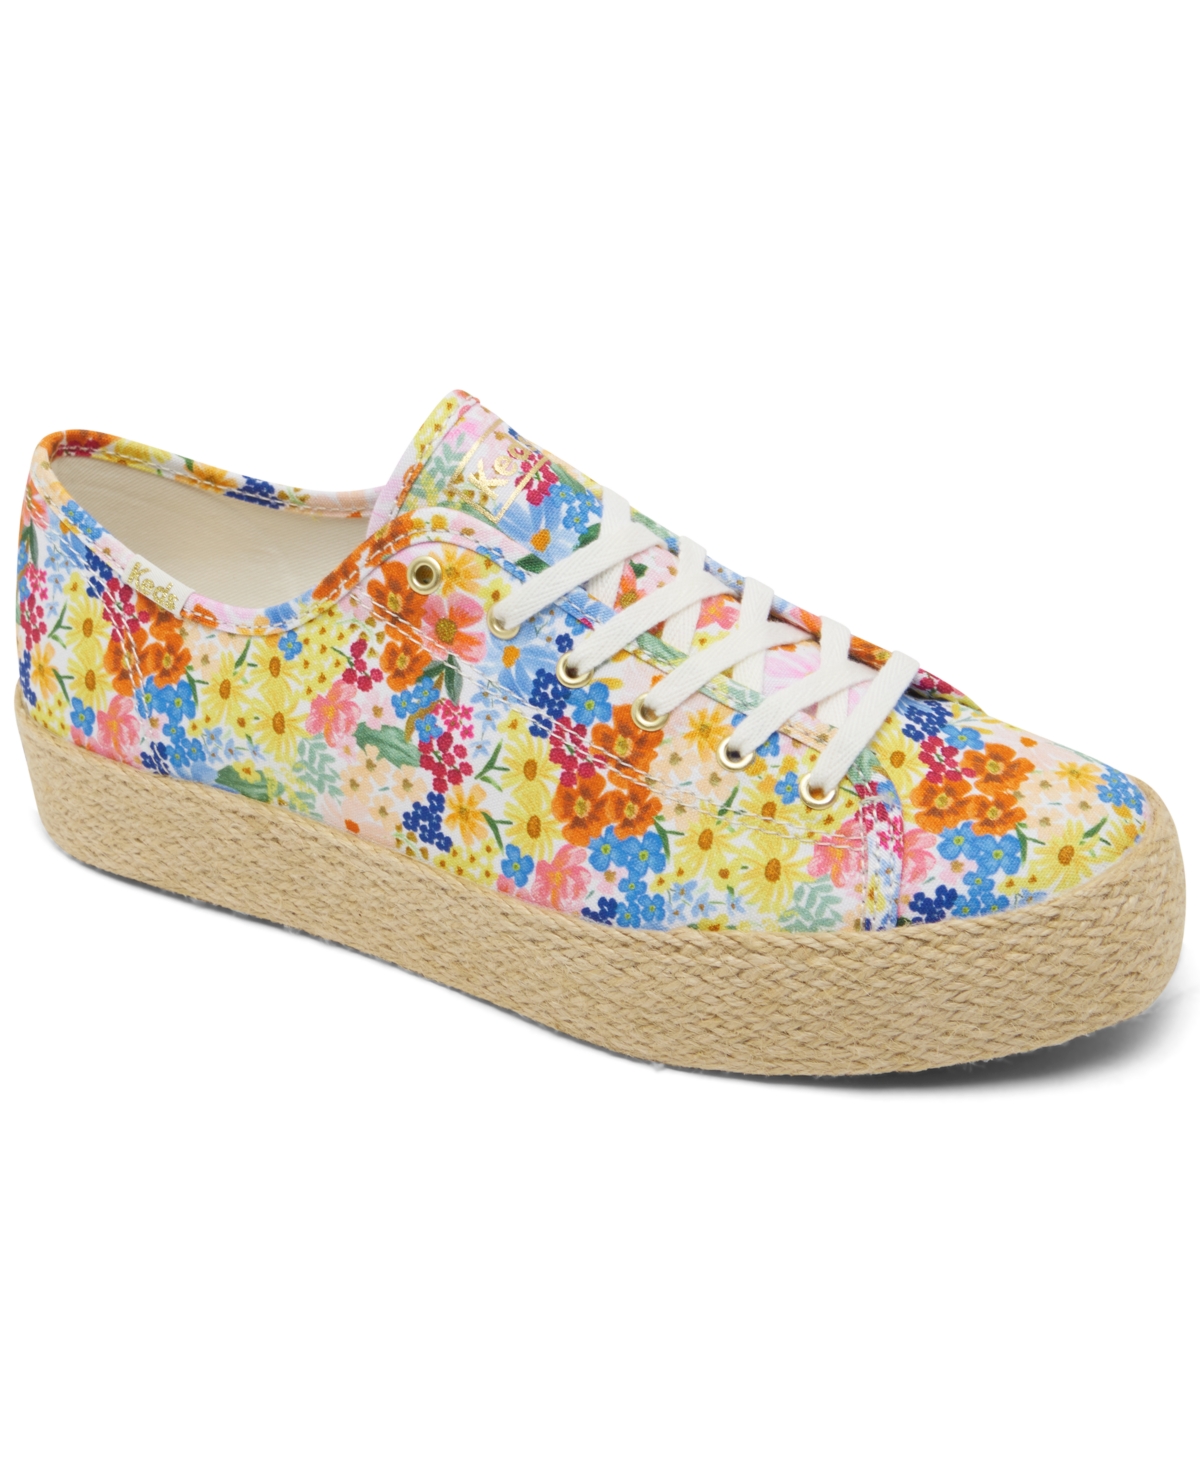 Keds Women's x Rifle Paper Co Triple Kick Jute Margaux Platform Casual Sneakers from Finish Line